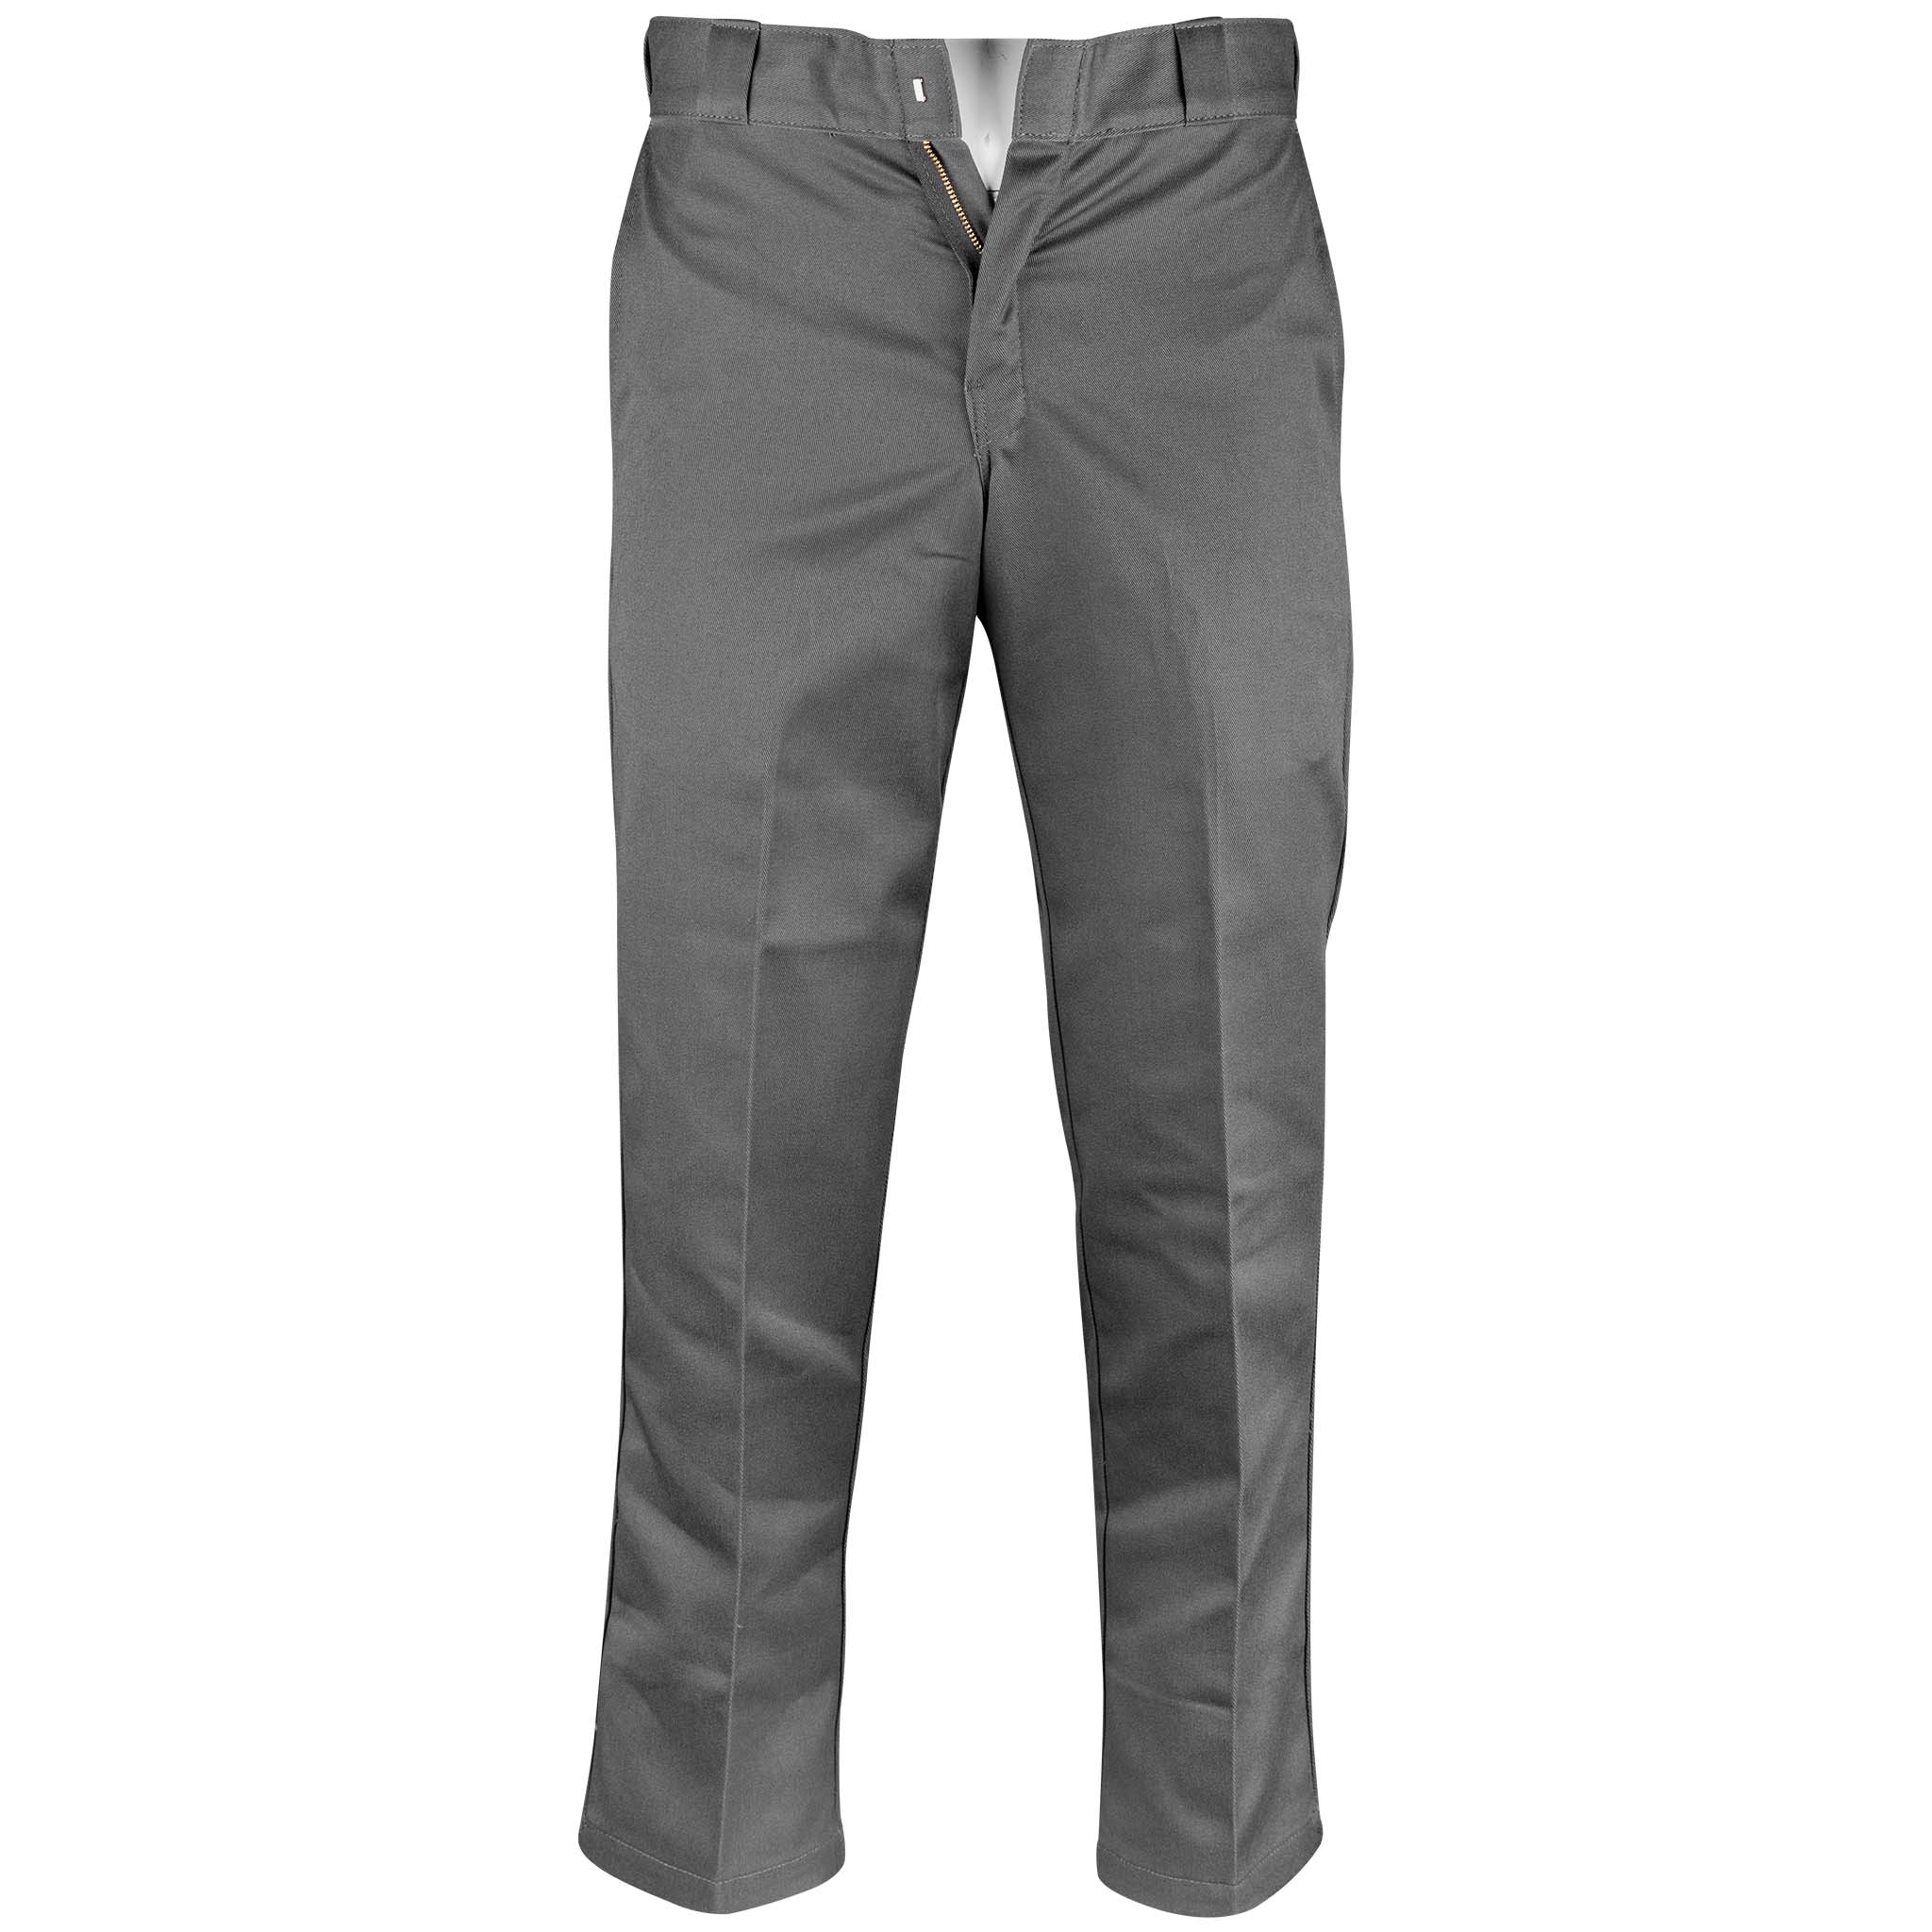 Buy FRAULEIN Women's Formal Office Work Pant Bootcut Straight Leg Trousers  with Loops Zip Fly Button Closure and Four Functional Pockets (L, Grey) at  Amazon.in